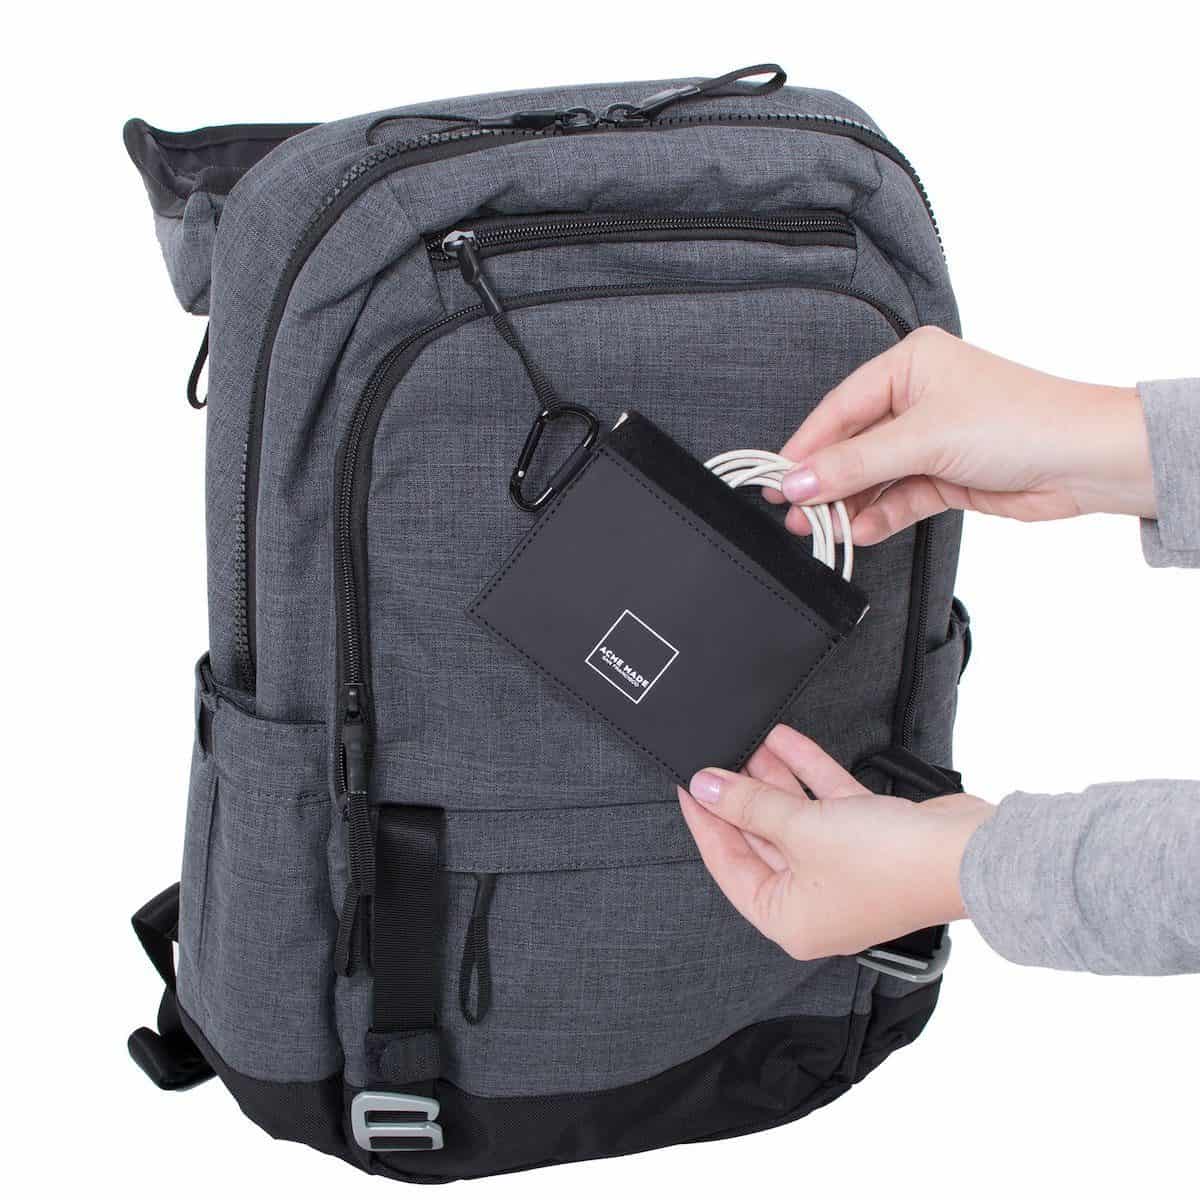 dailymom parent portal acme backpack 3 daily mom parent portal gifts for men